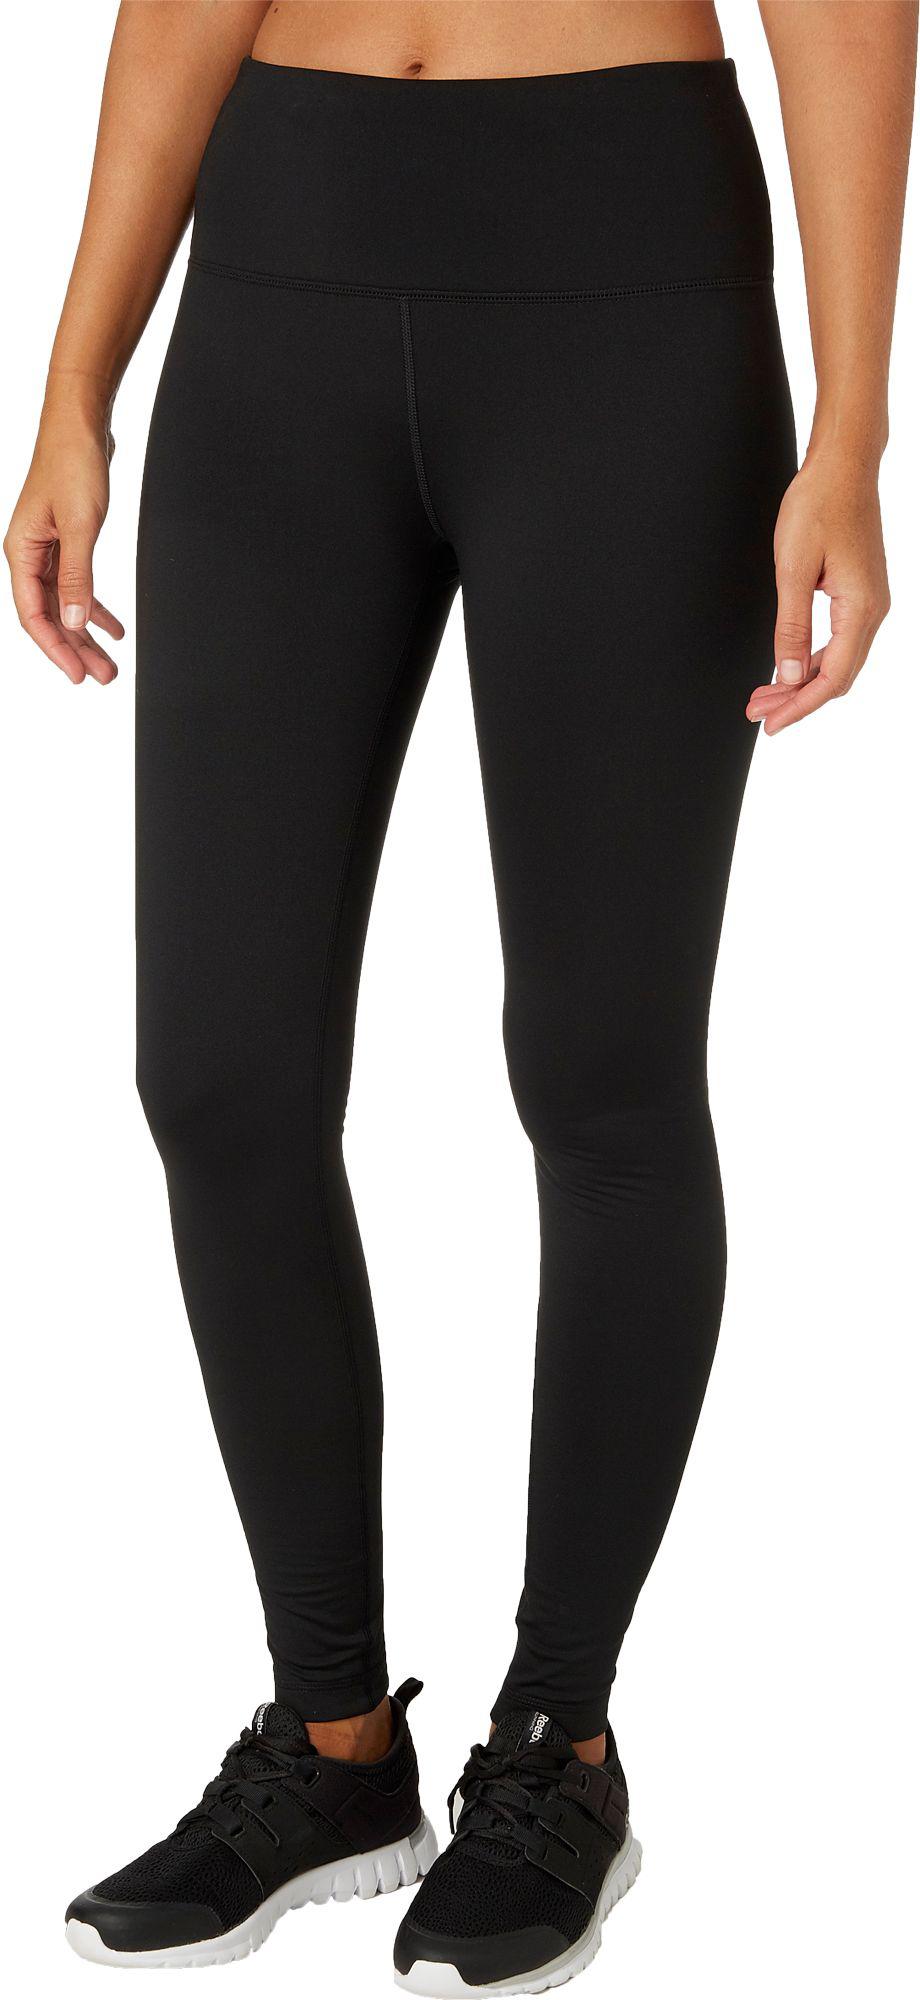 reebok women's cold weather compression tights